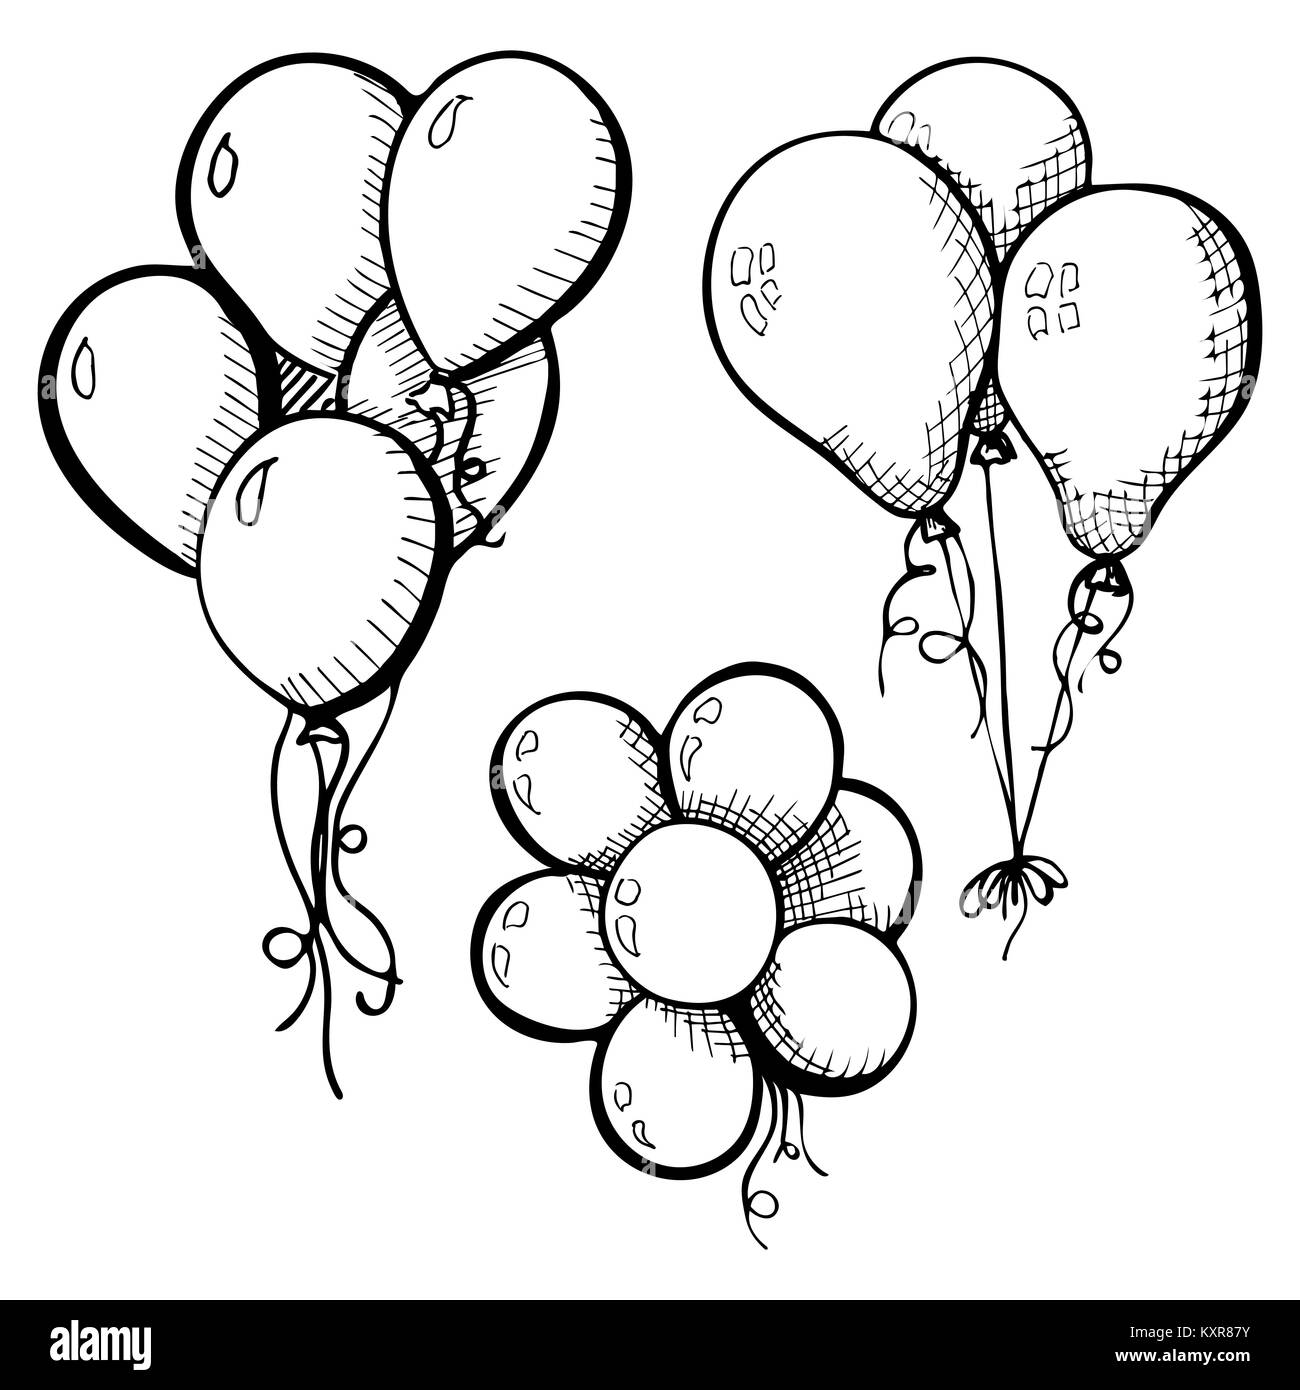 Group Different Colored Balloons On Strings Stock Vector (Royalty Free)  2861624